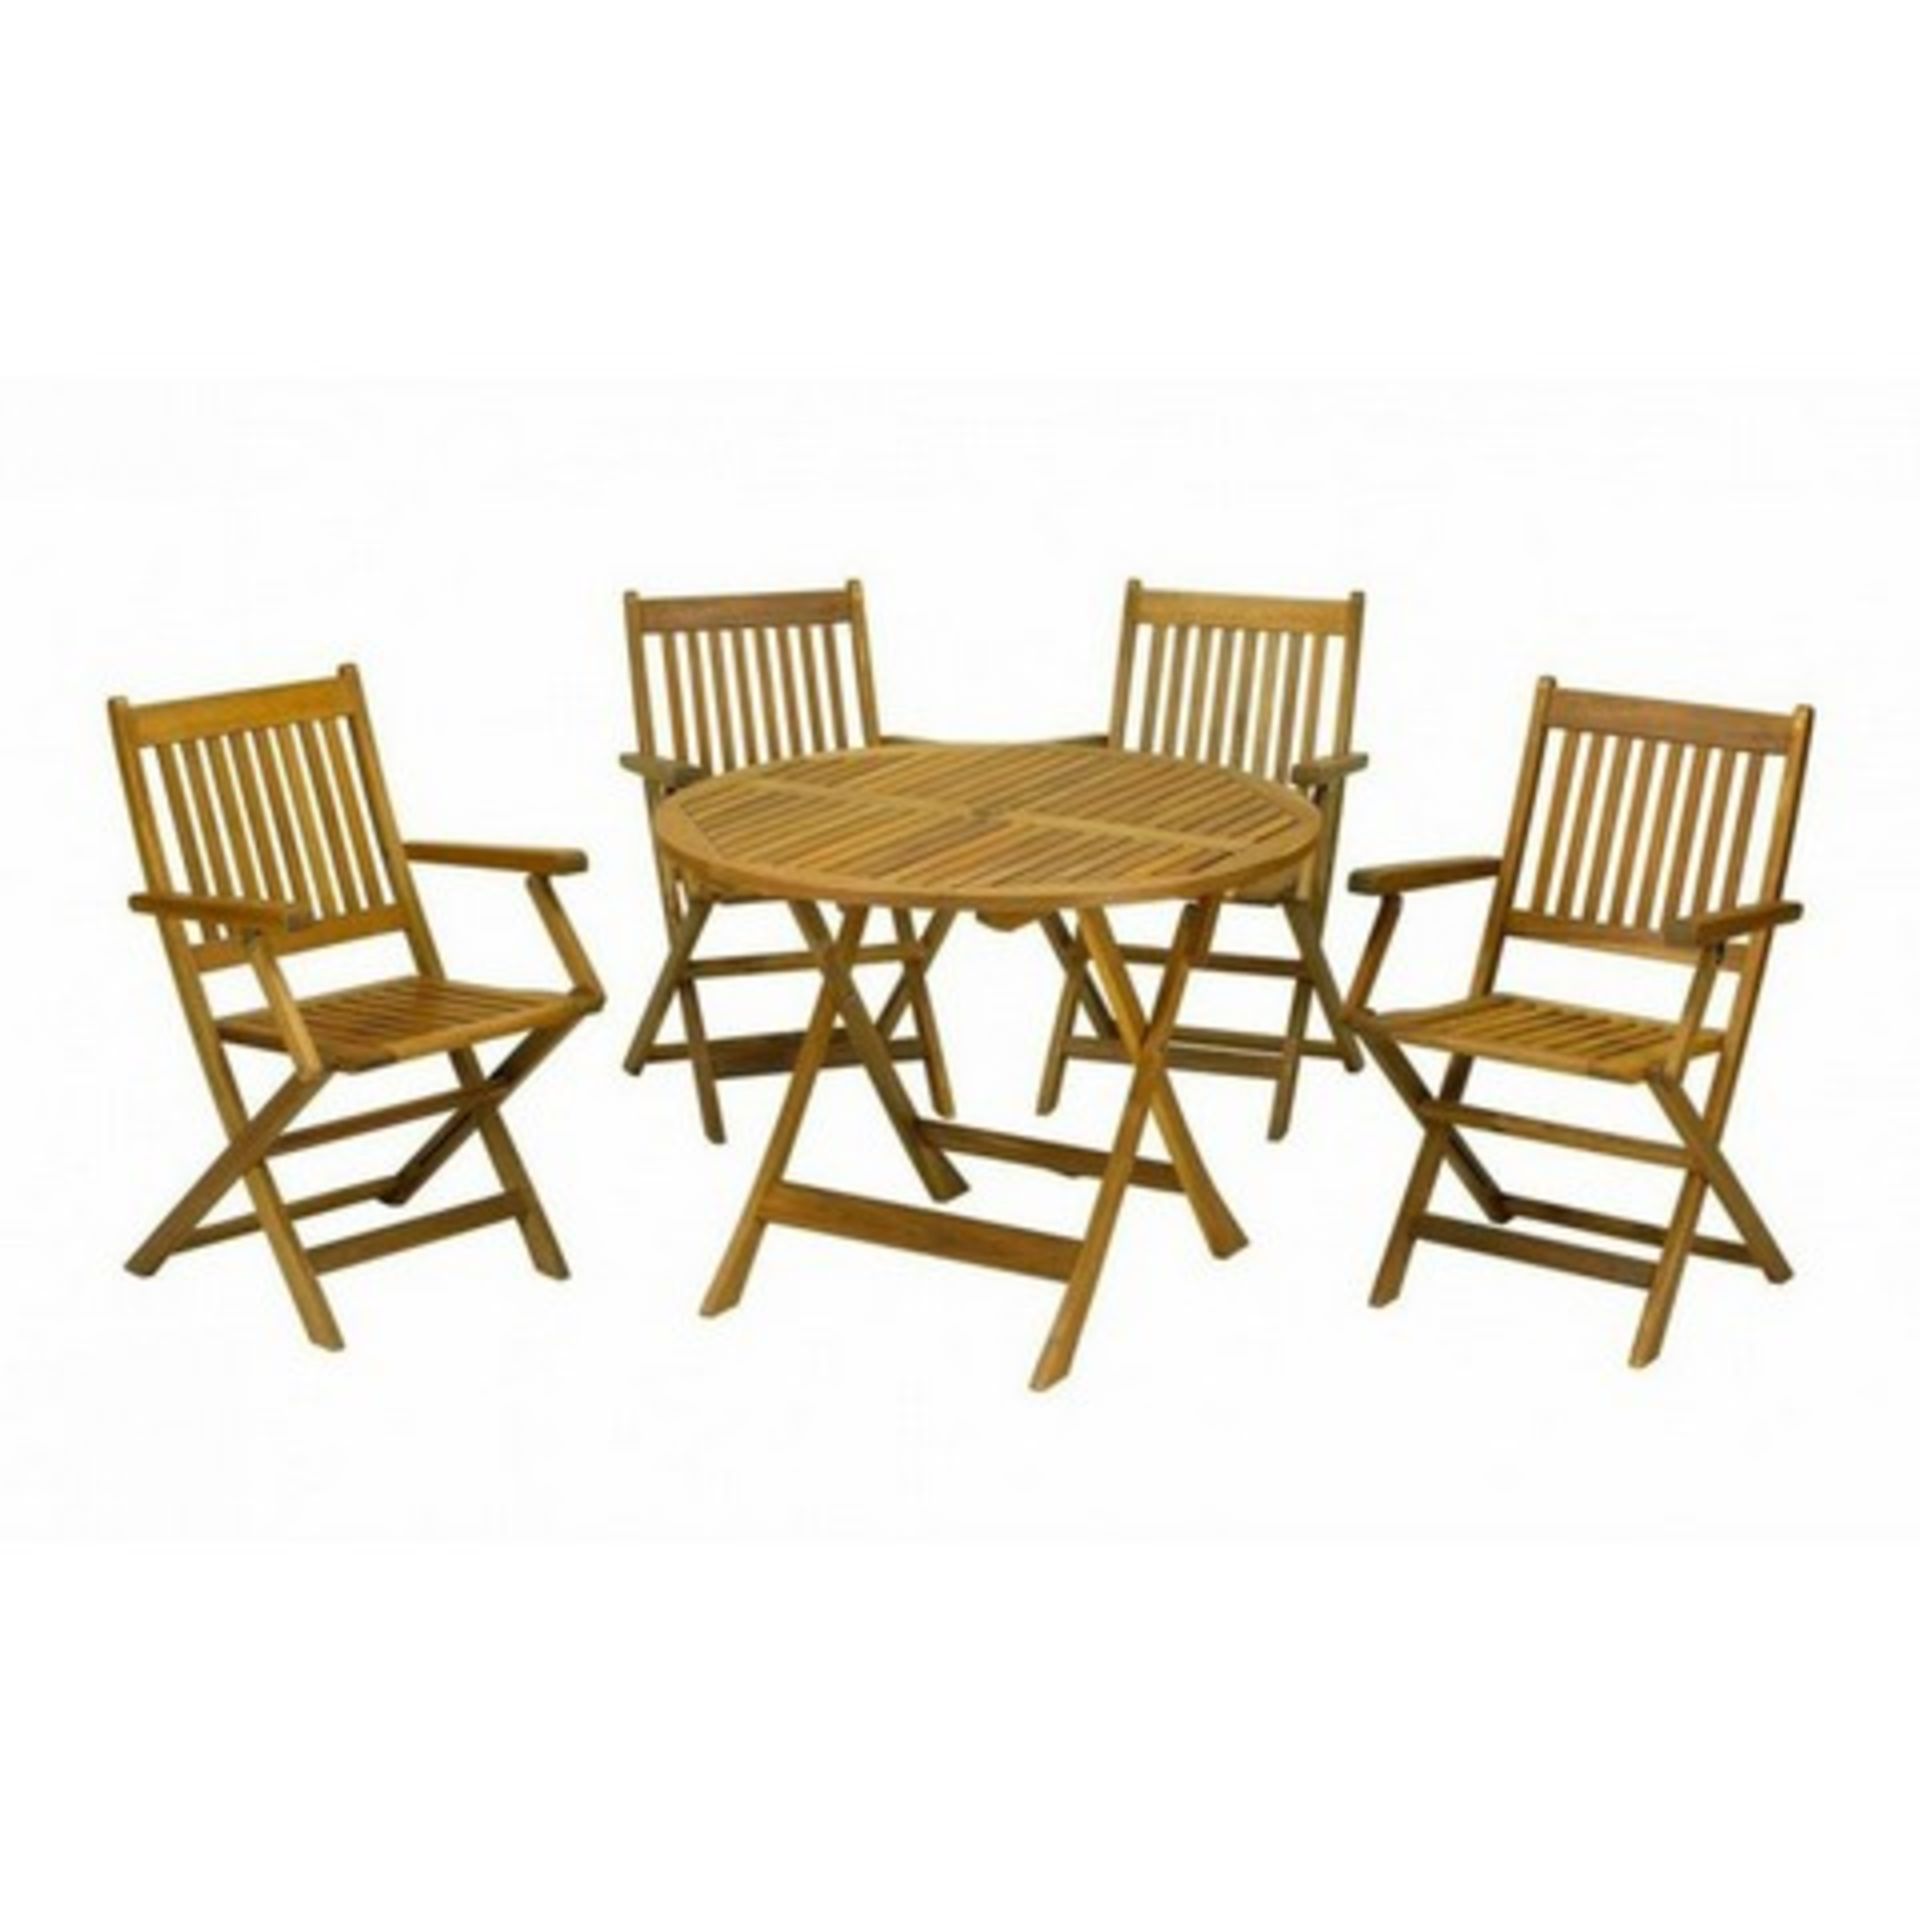 V Brand New Manhattan Double Folding Table With Four Armchairs ISP £219.00 (Oak Furniture House)